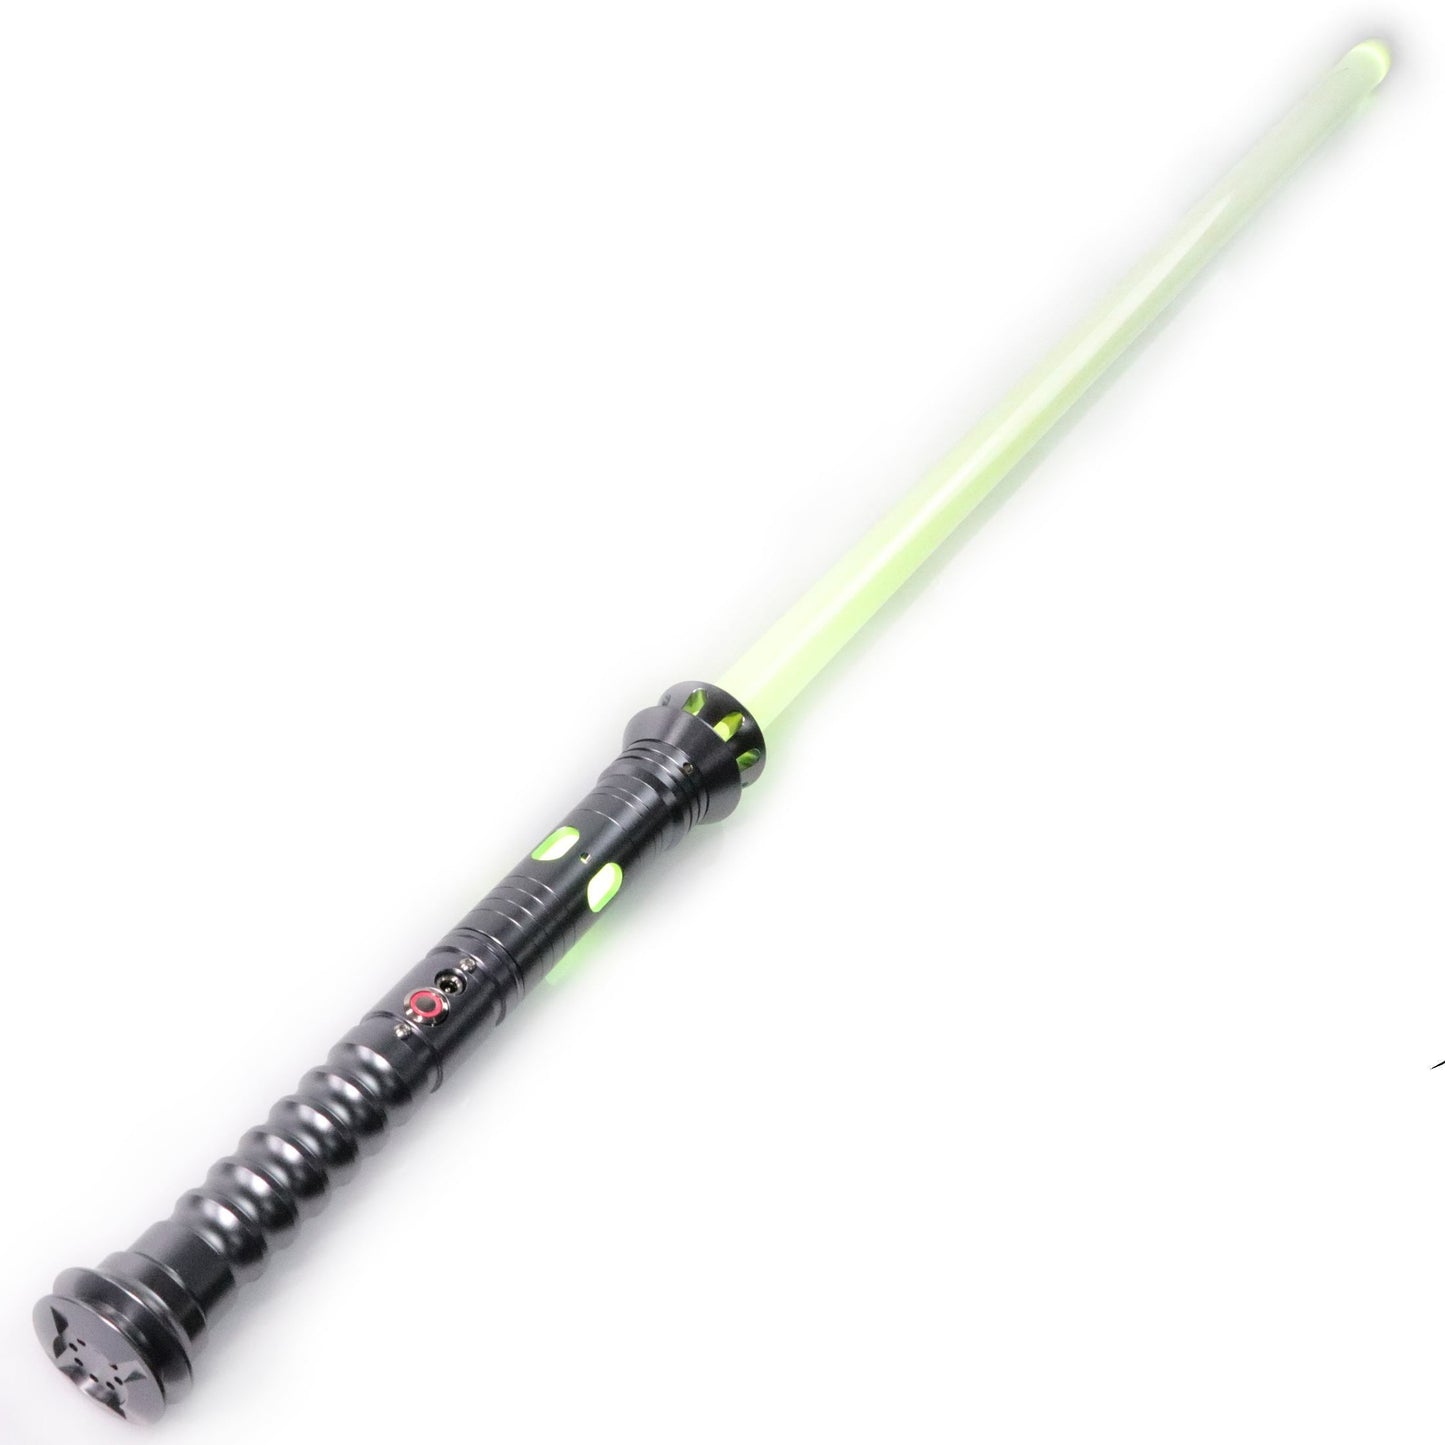 Caseo Neopixel Lightsaber Gray / RGB isabers